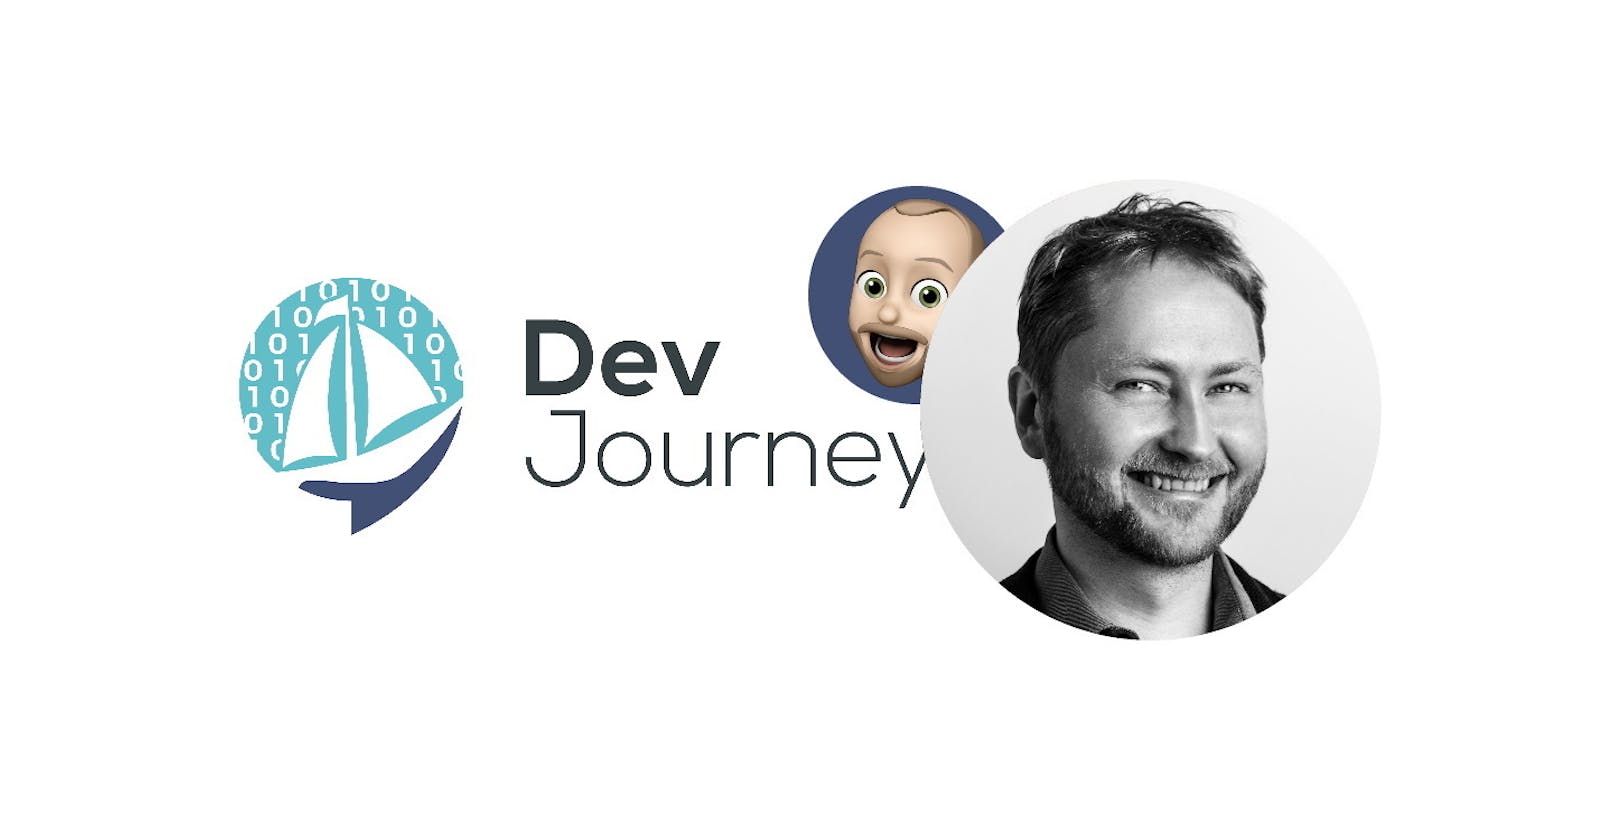 Matt Biilmann discovered the JAMStack... and other things I learned recording his DevJourney (#140)